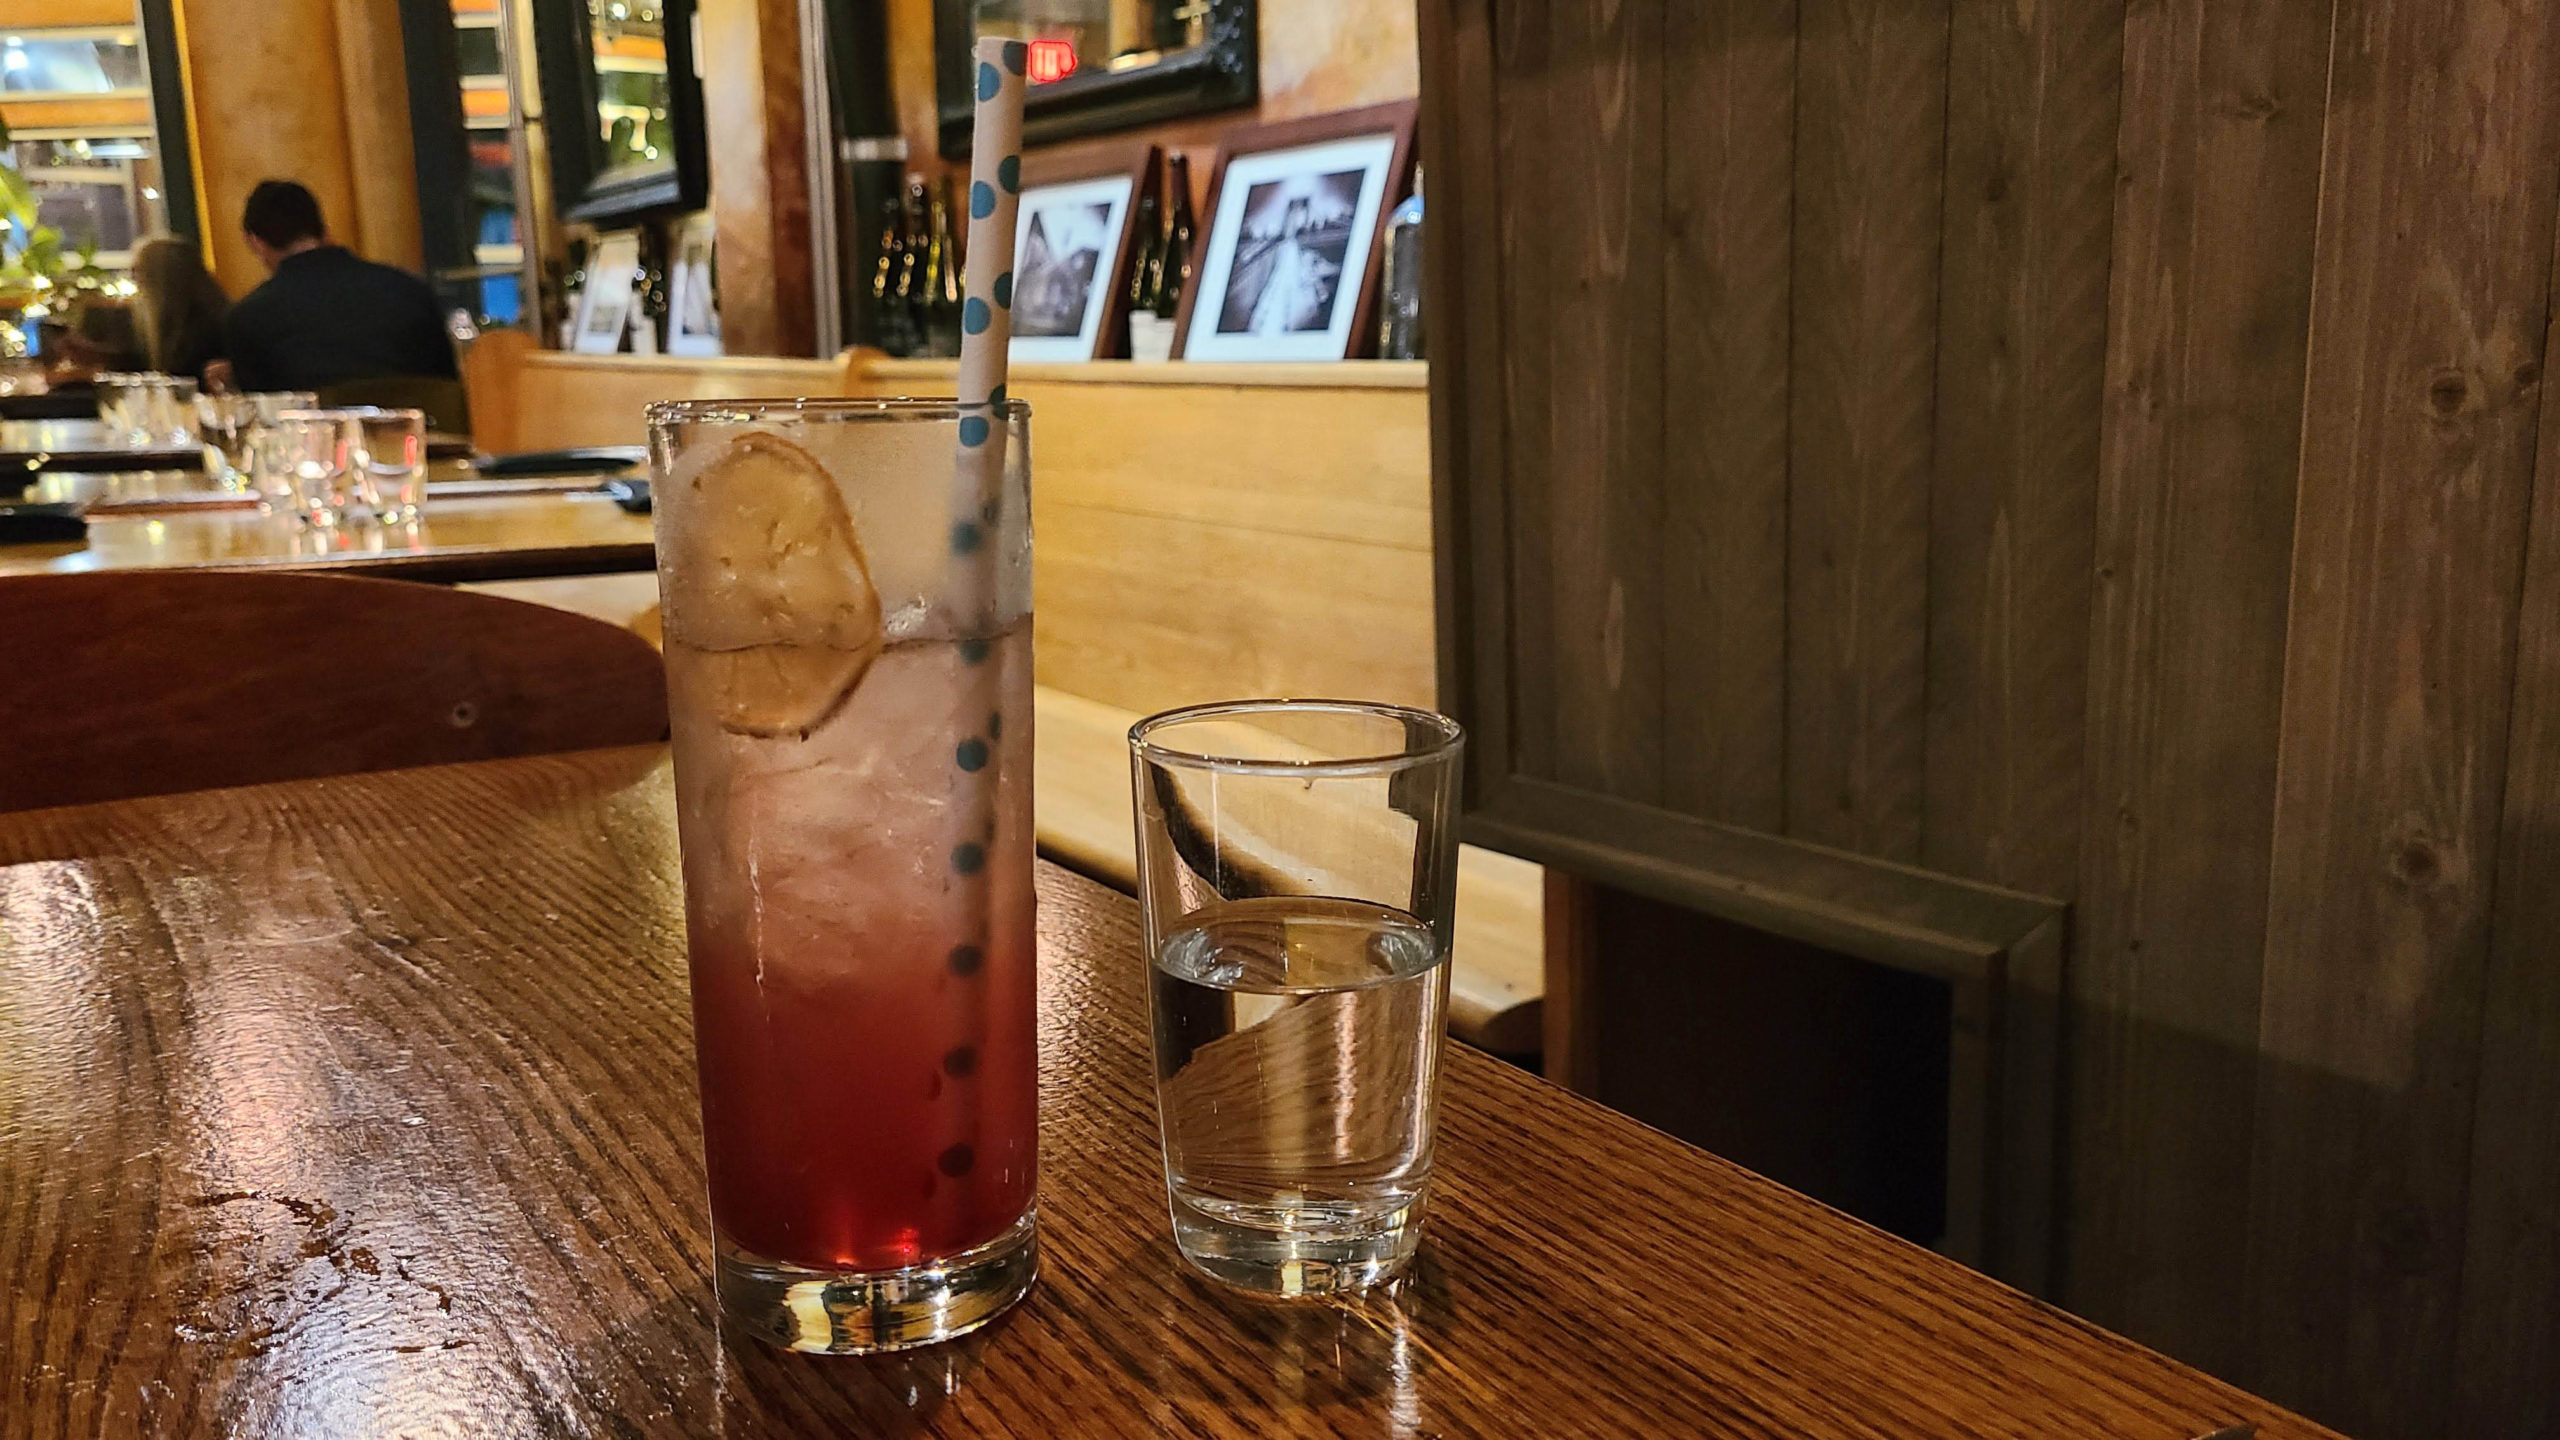 A glass containing a mocktail sits on a restaurant table to the left of a glass of water. The mocktail is garnished with a slice of dried fruit.